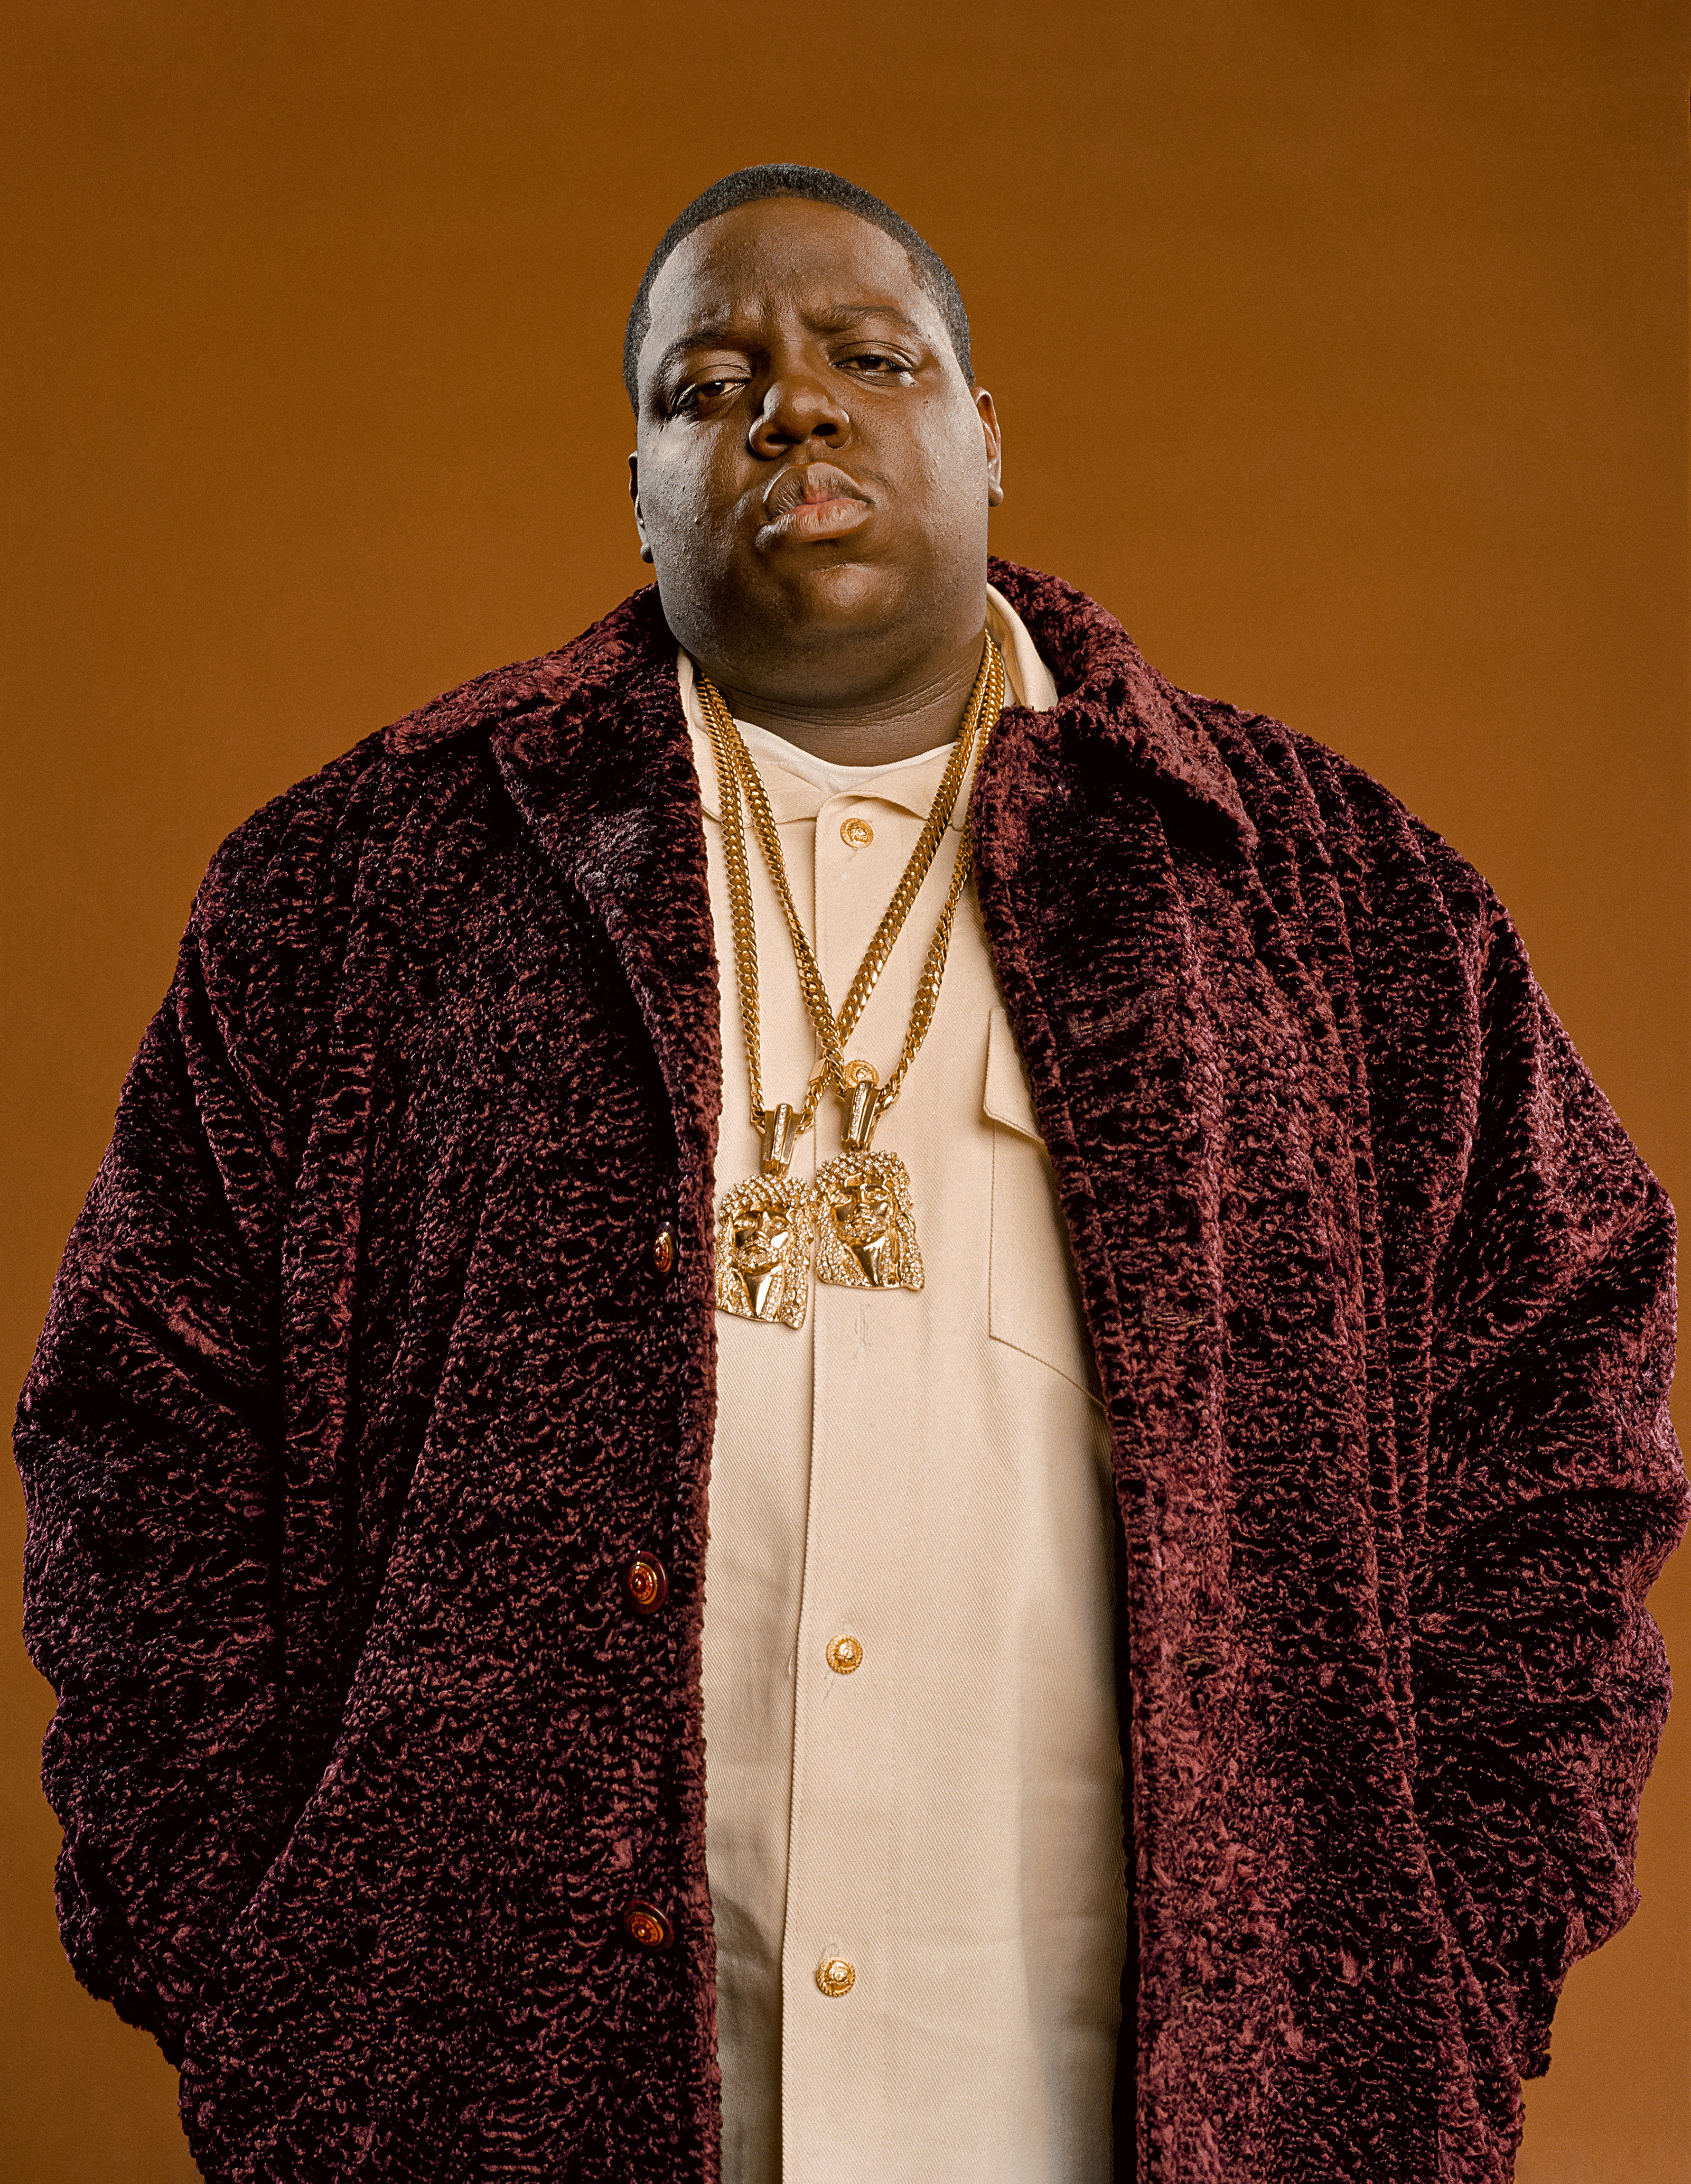 Notorious B.I.G. aka Biggie Smalls: Created by Tito Caicedo of Manny’s New York, Biggie’s Jesus piece set off a trend in hip-hop that is now a staple look for artists. Michael Lavine, Queens, New York, 1997